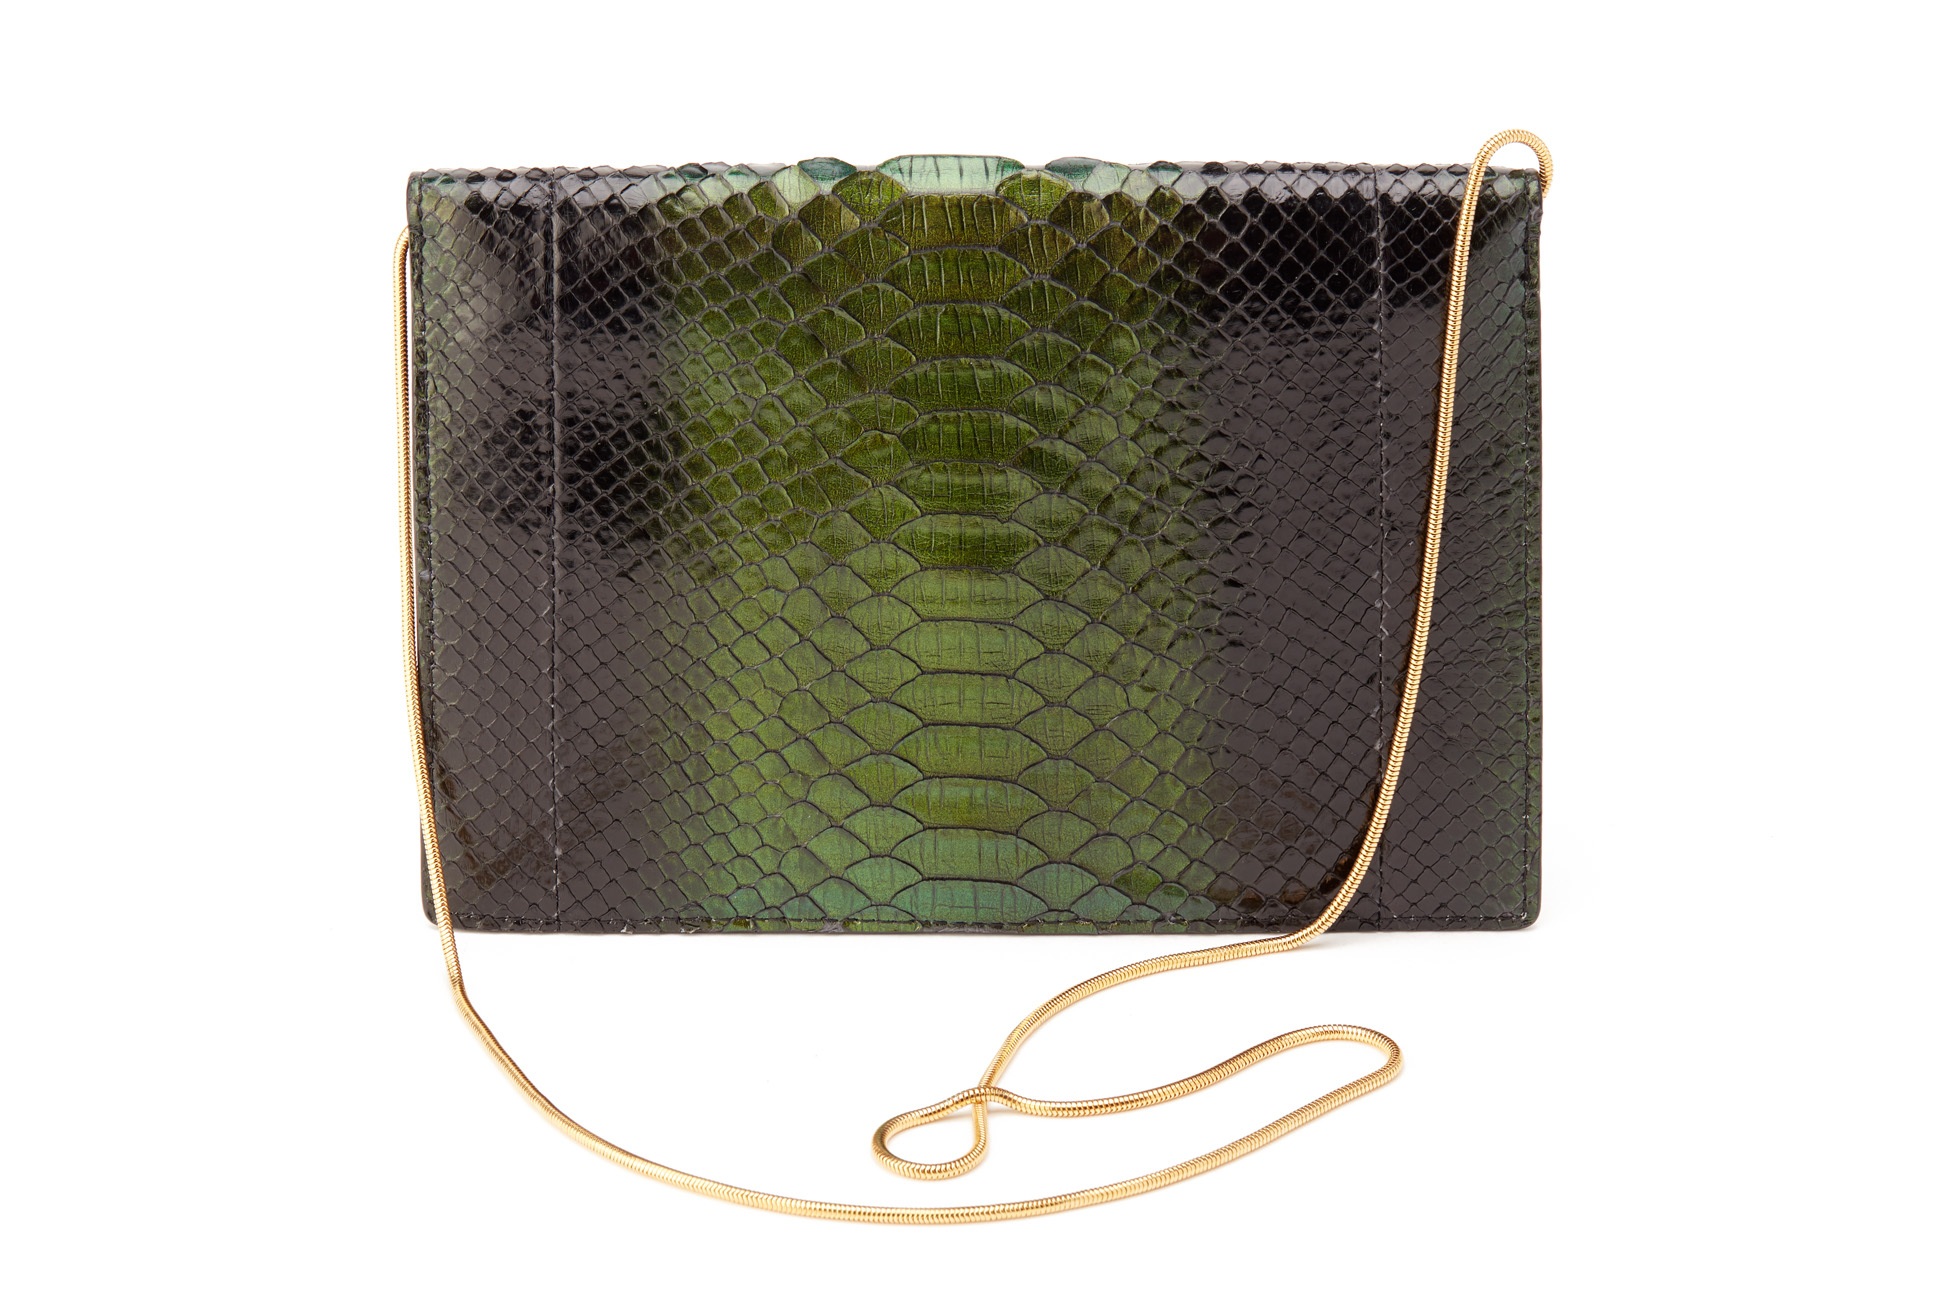 AN AMISHI LONDON PYTHON SKIN LEATHER CLUTCH - Image 2 of 3